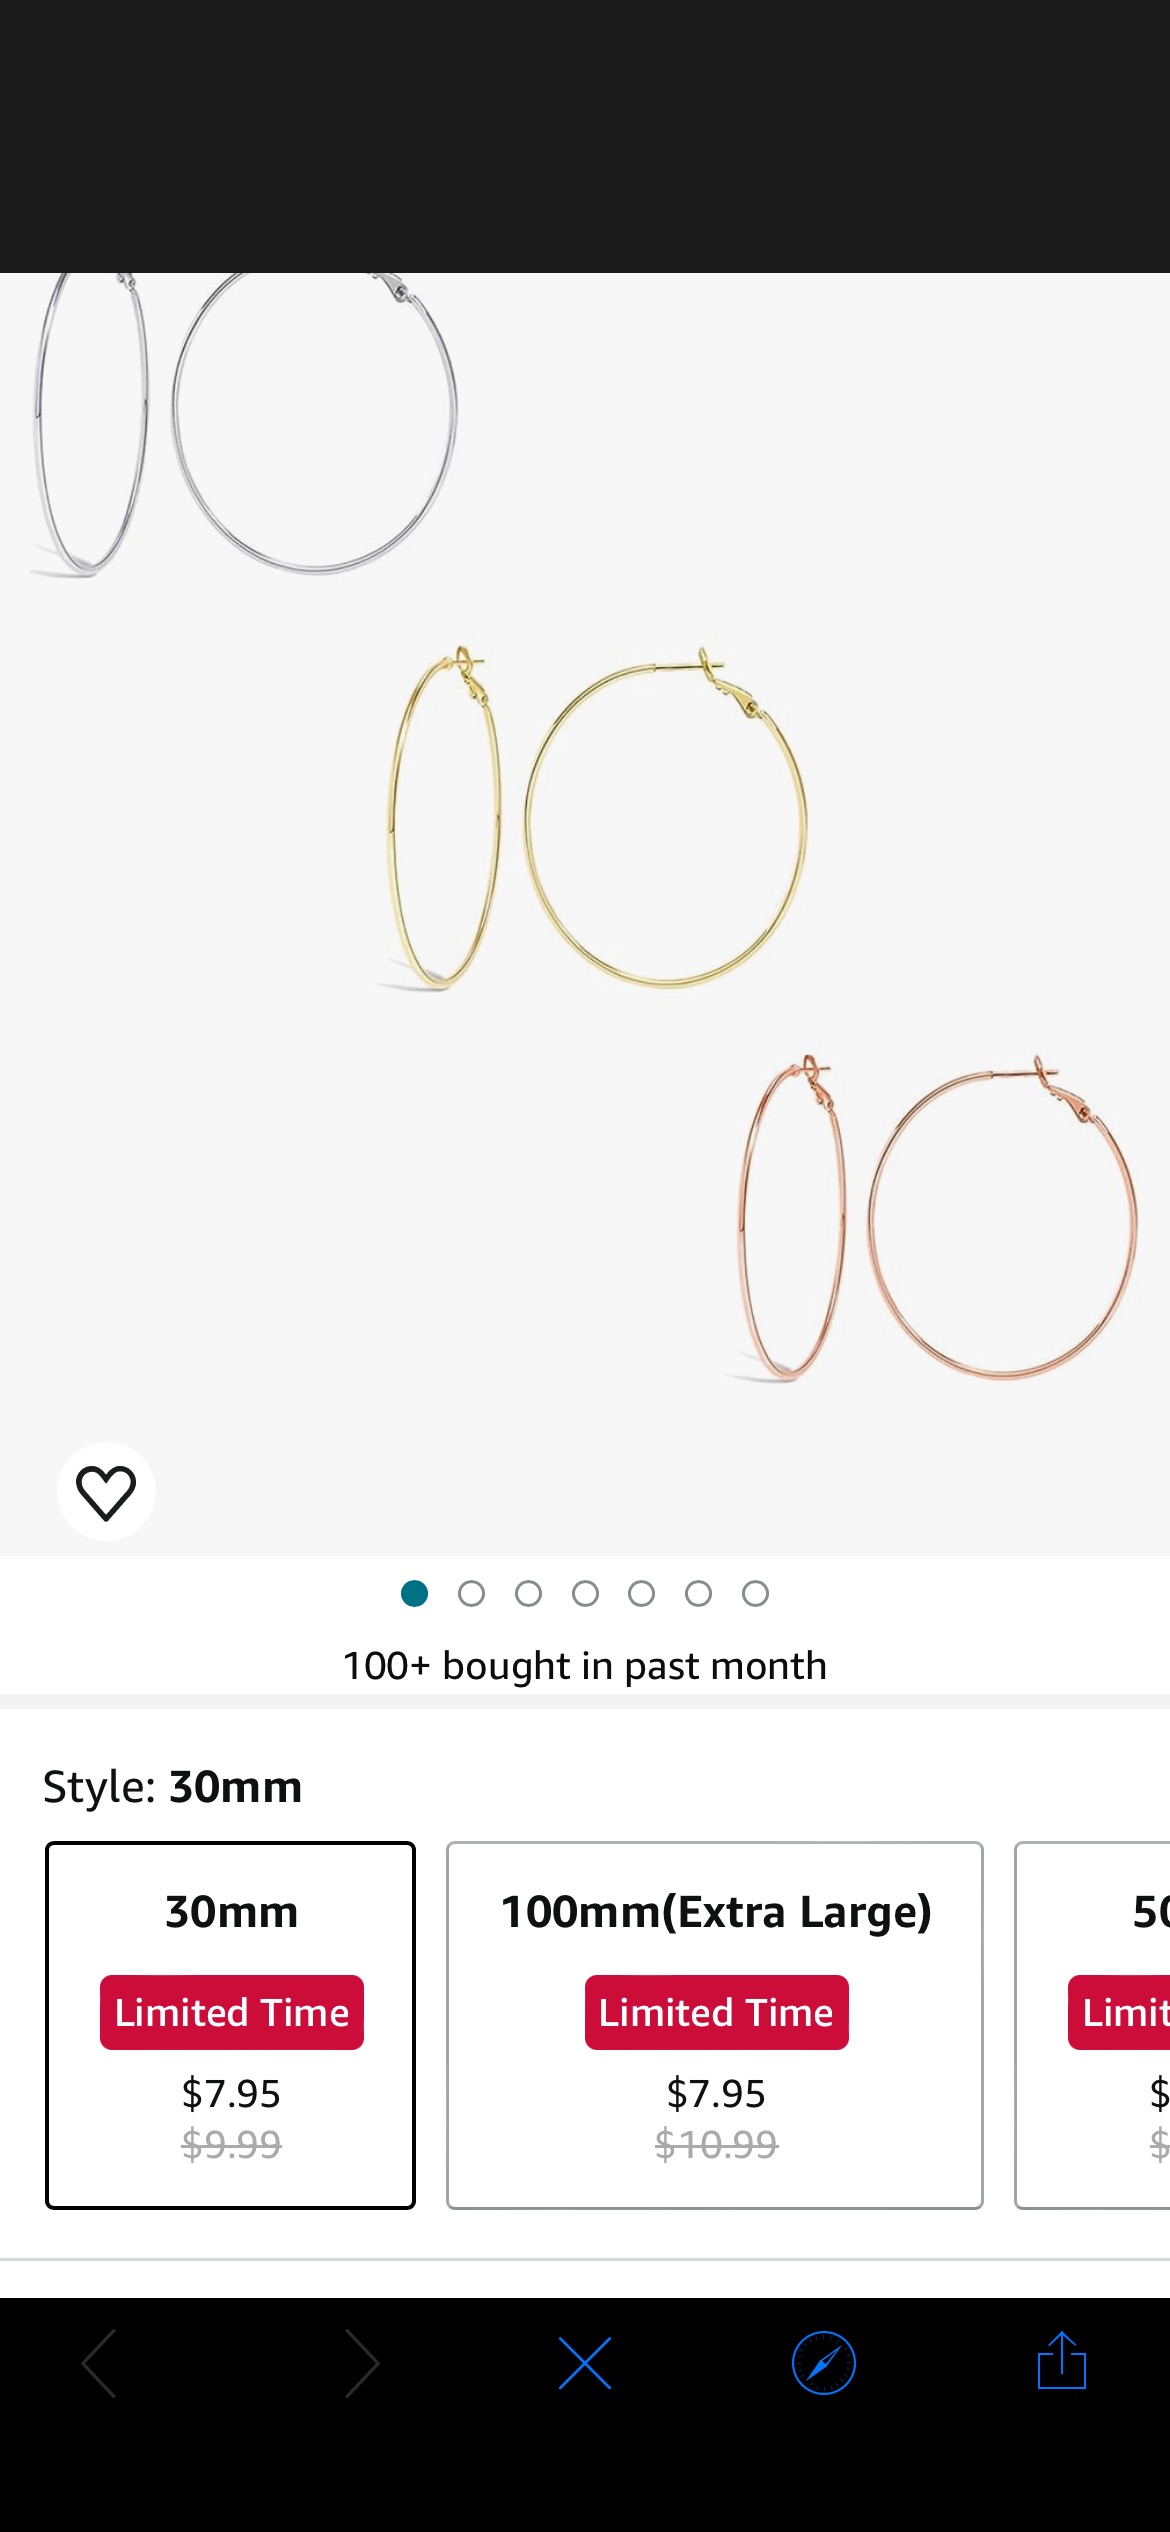 Amazon.com: Cocadant 3 Pairs 30mm Small Gold Hoop Earrings for Women Girls,Stainless Steel Hoop Earrings 14K Gold Plated Rose Gold Plated Silver Hypoallergenic Hoops set: Clothing, Shoes & Jewelry